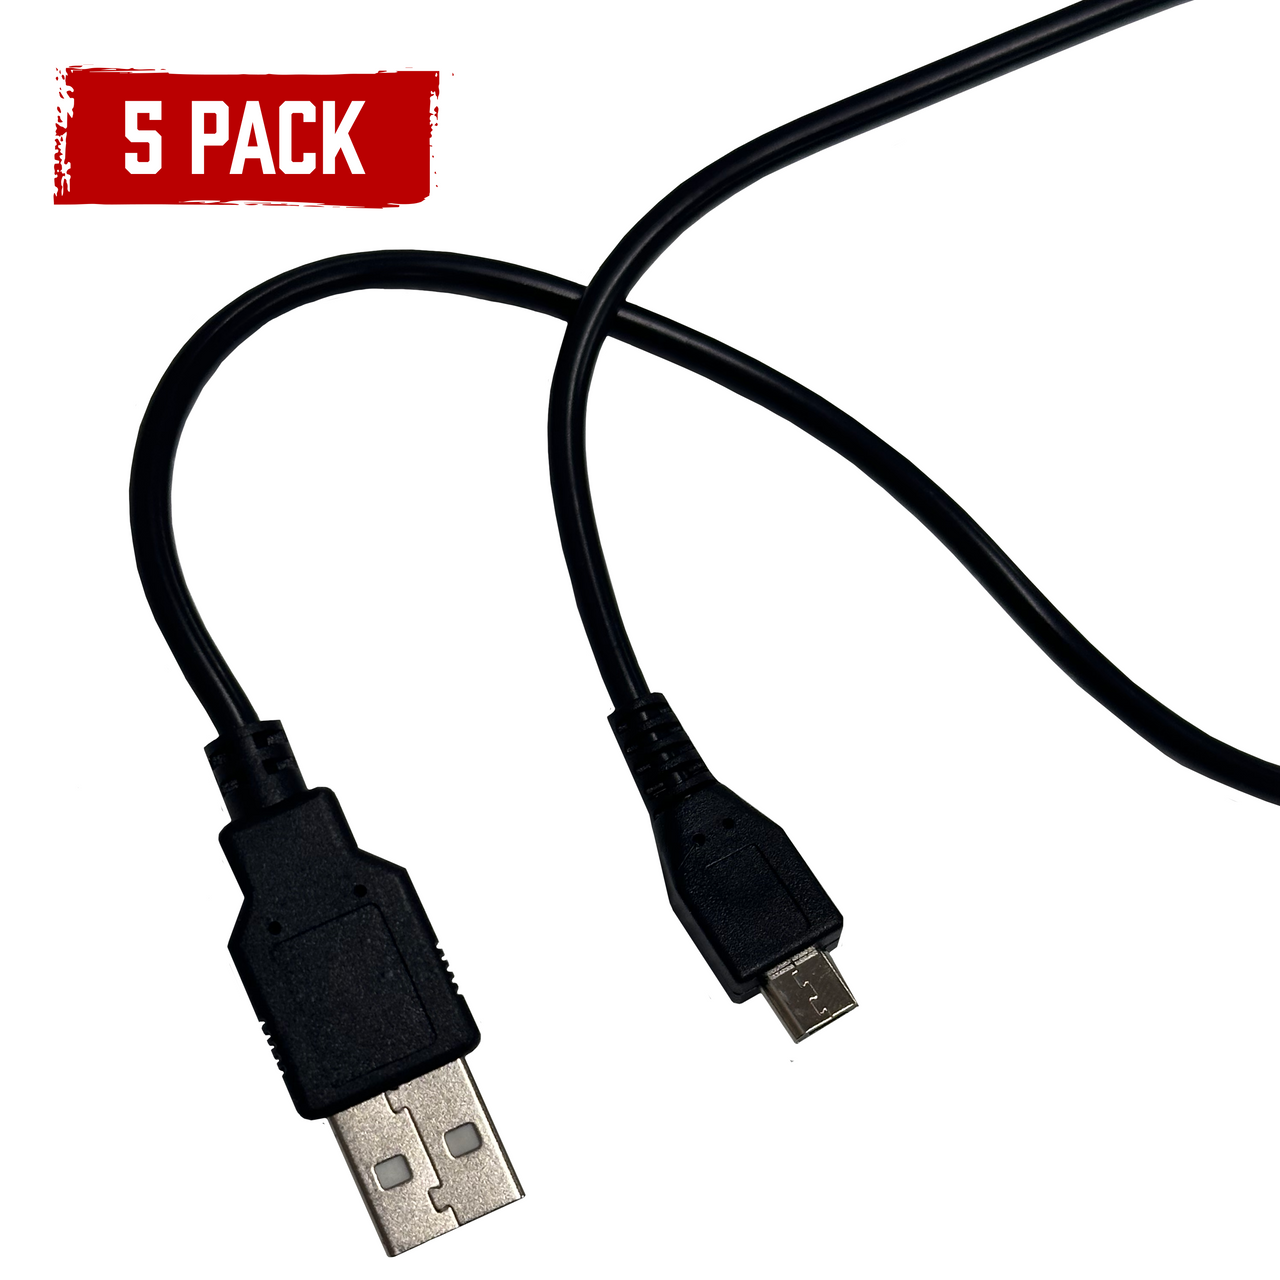 Wyndscent 2.0 Charging Cord 5 Pack